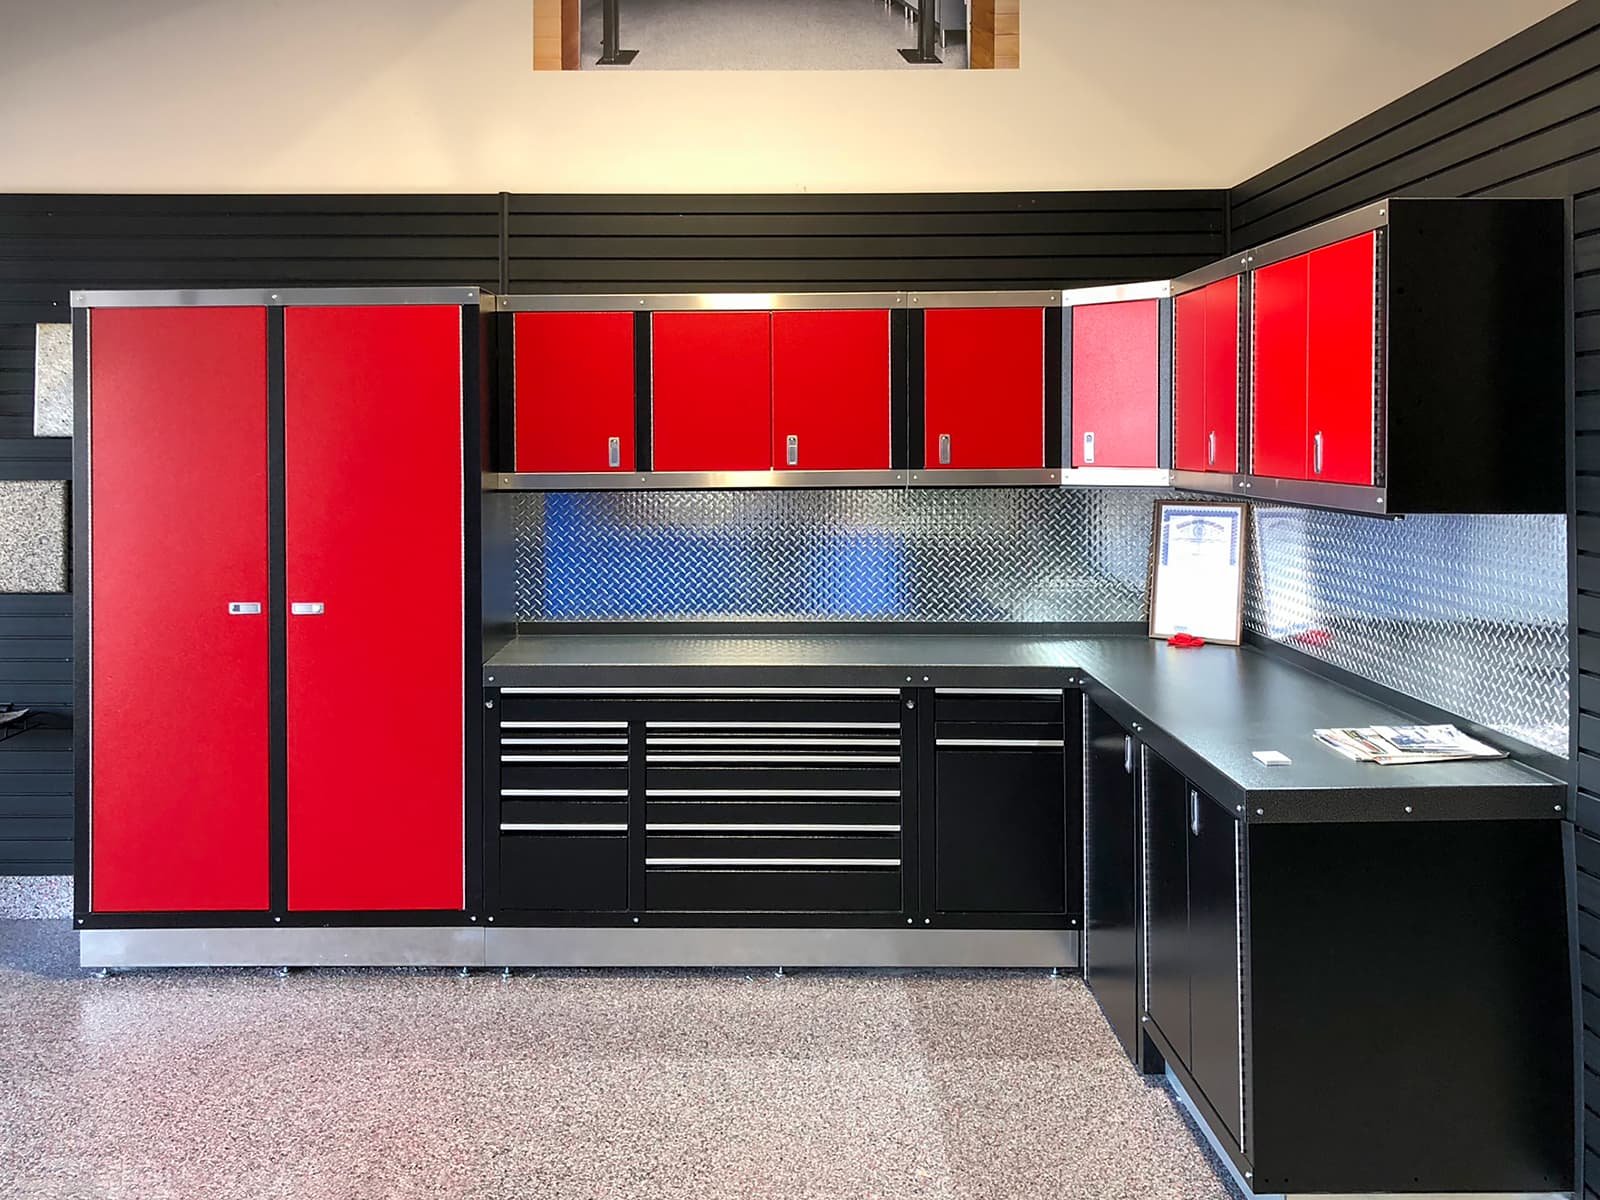 xgarage-living-detroit-red-garage-cabinets.jpg.pagespeed.ic.CznxPdJS14